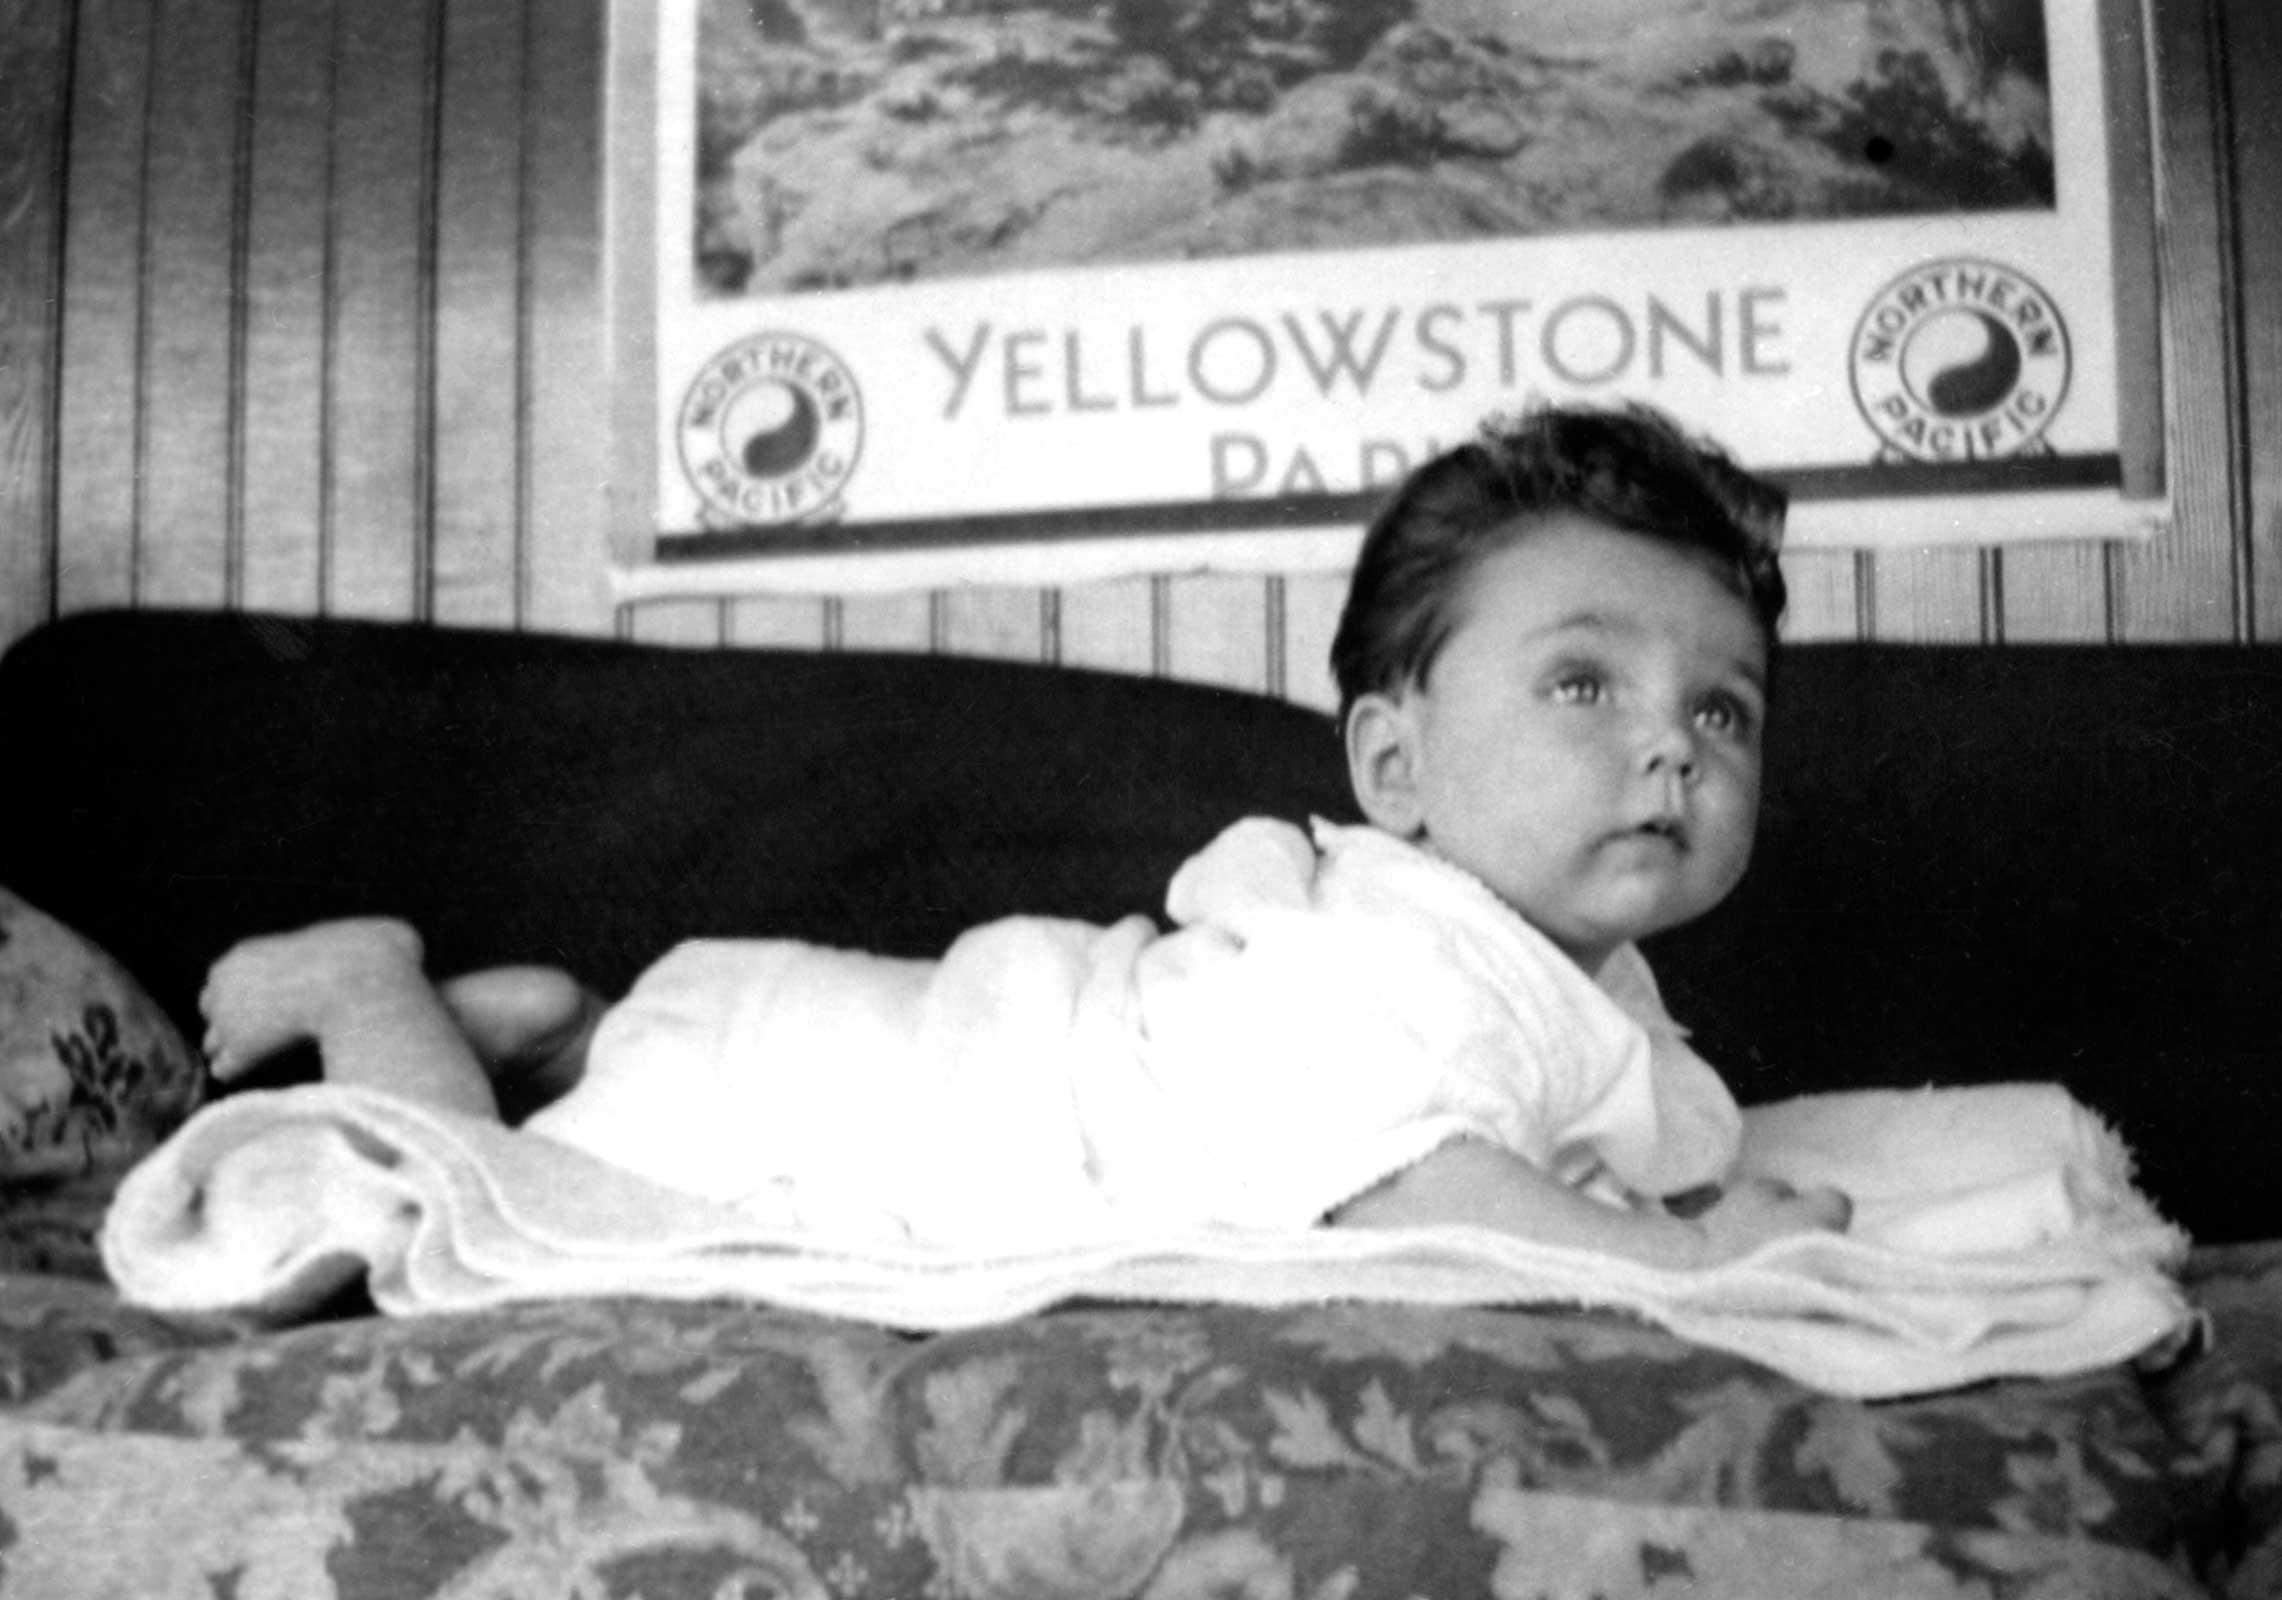 Nancy Holt as a young baby laying on a sofa with a Yellowstone Park poster in the background.